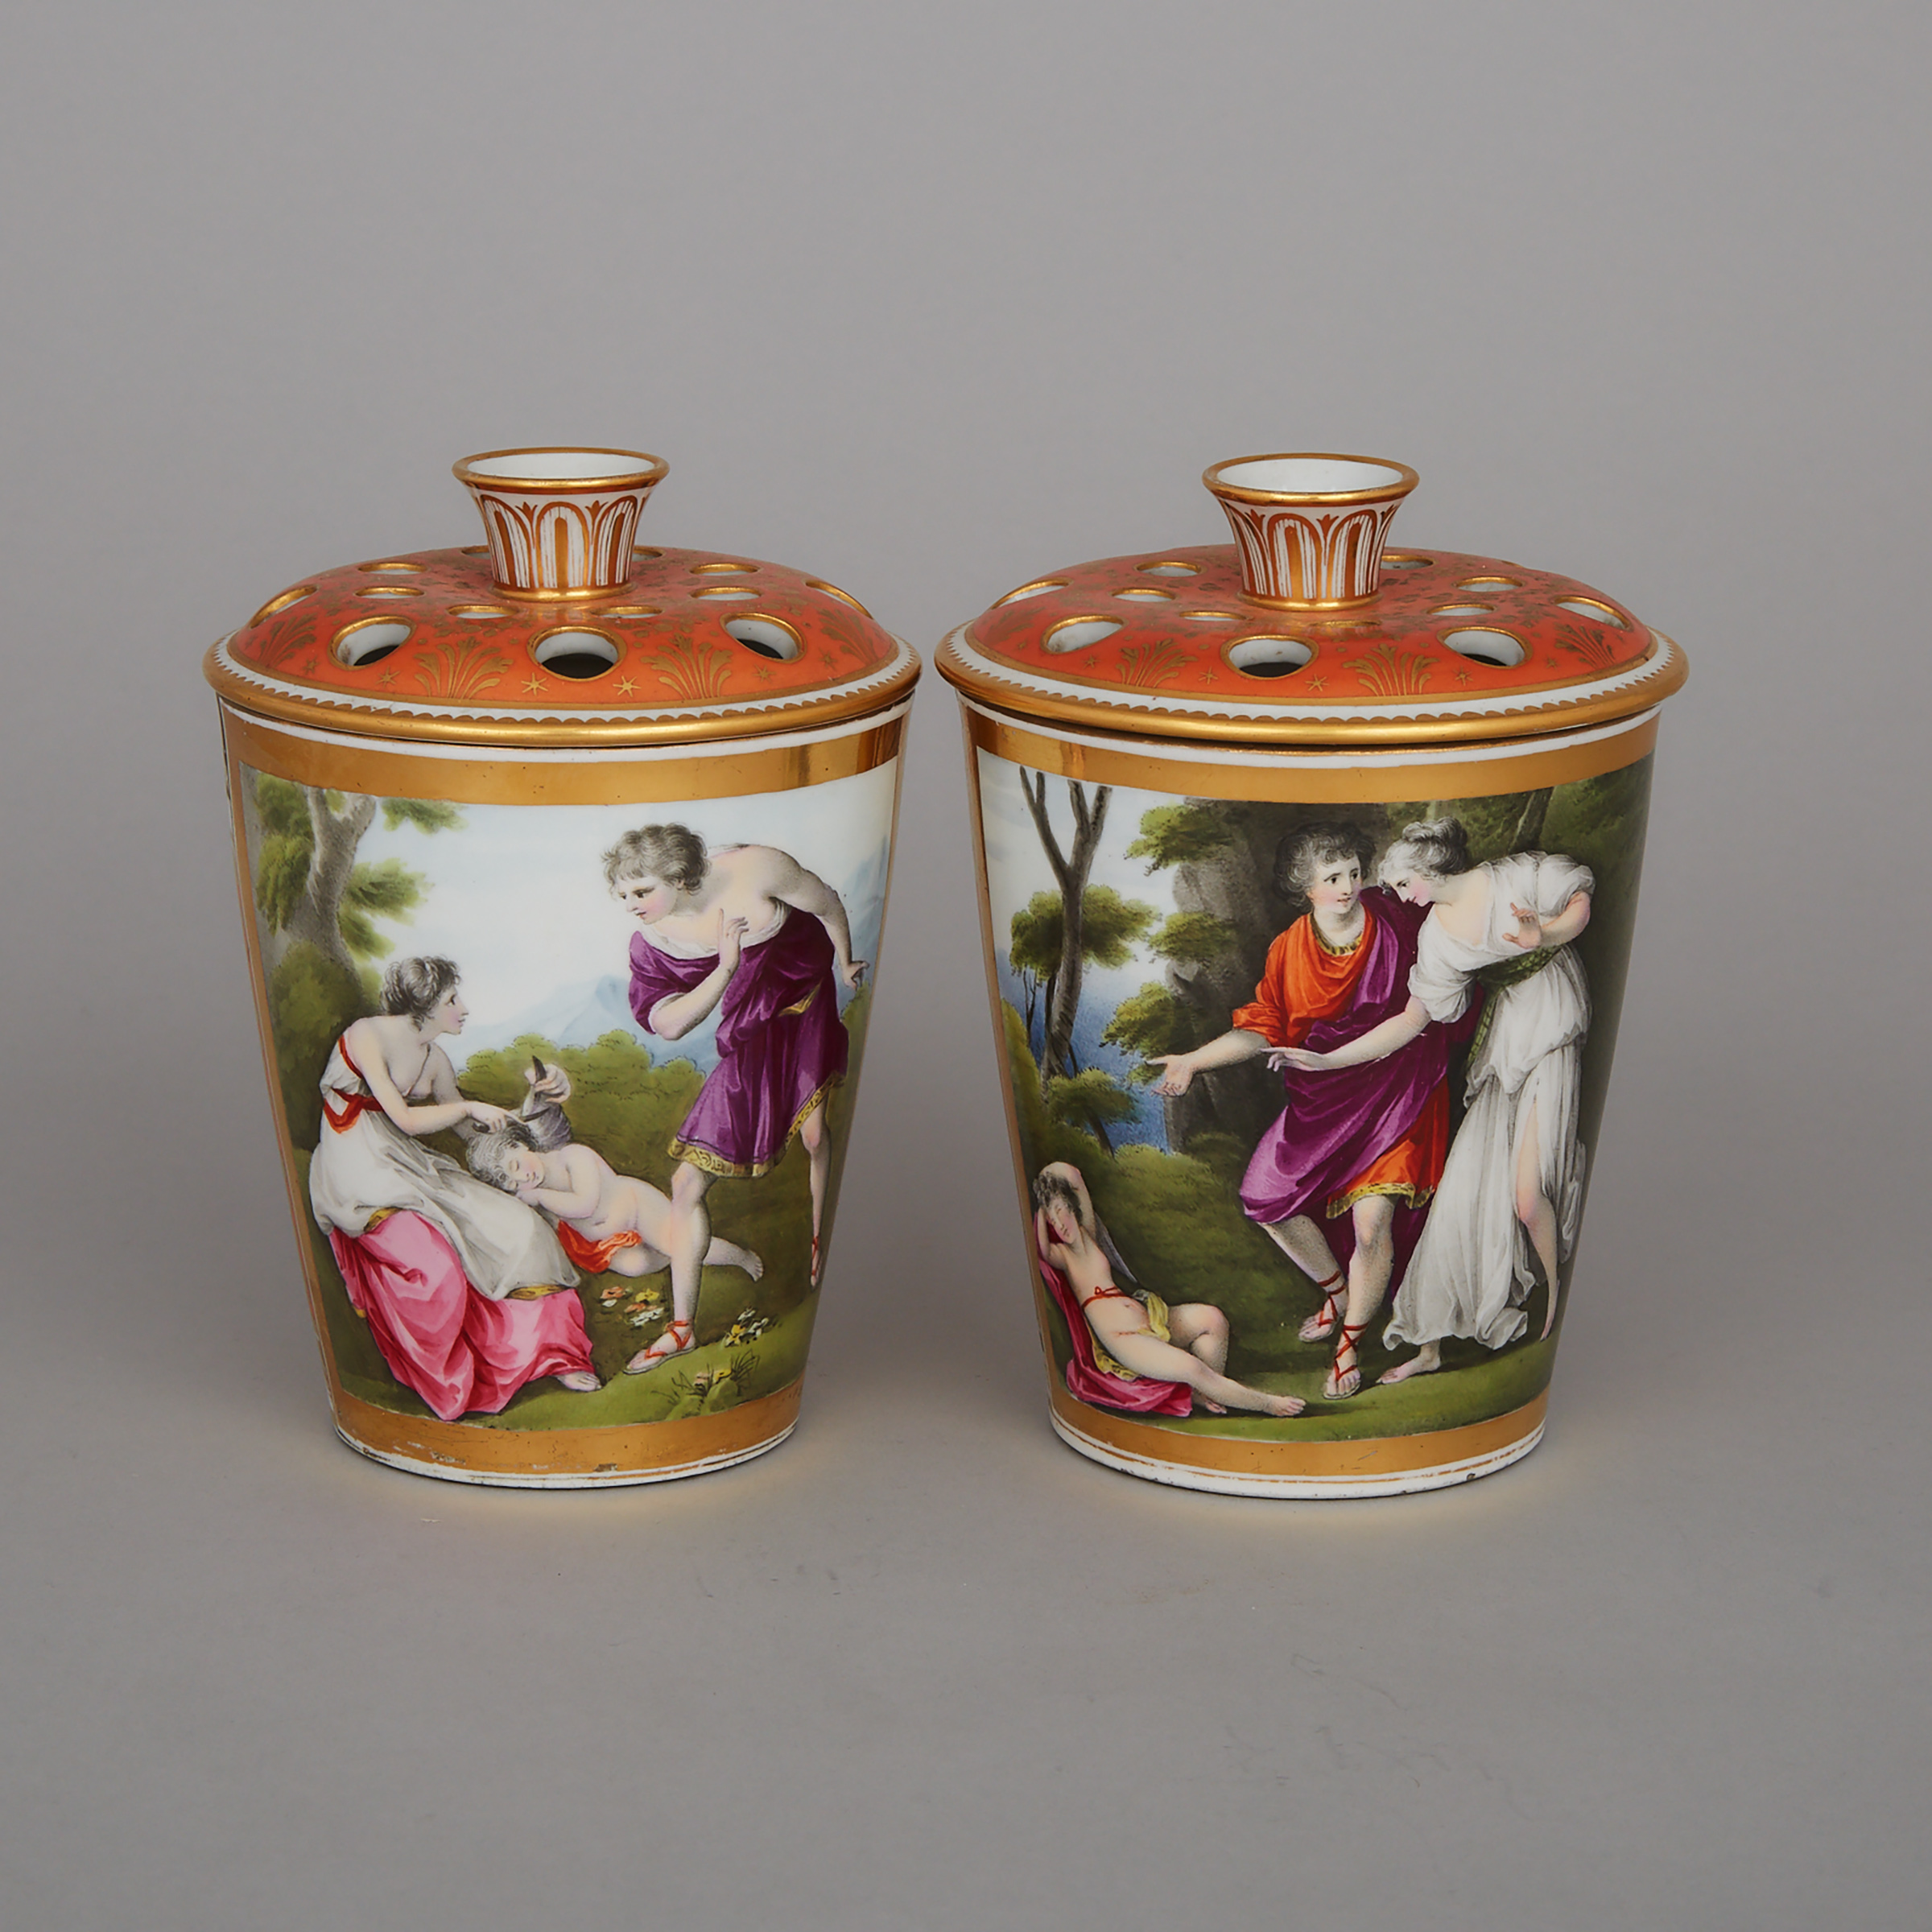 Pair of Chamberlains Worcester Orange and Gilt Ground Bough Pots, c.1800